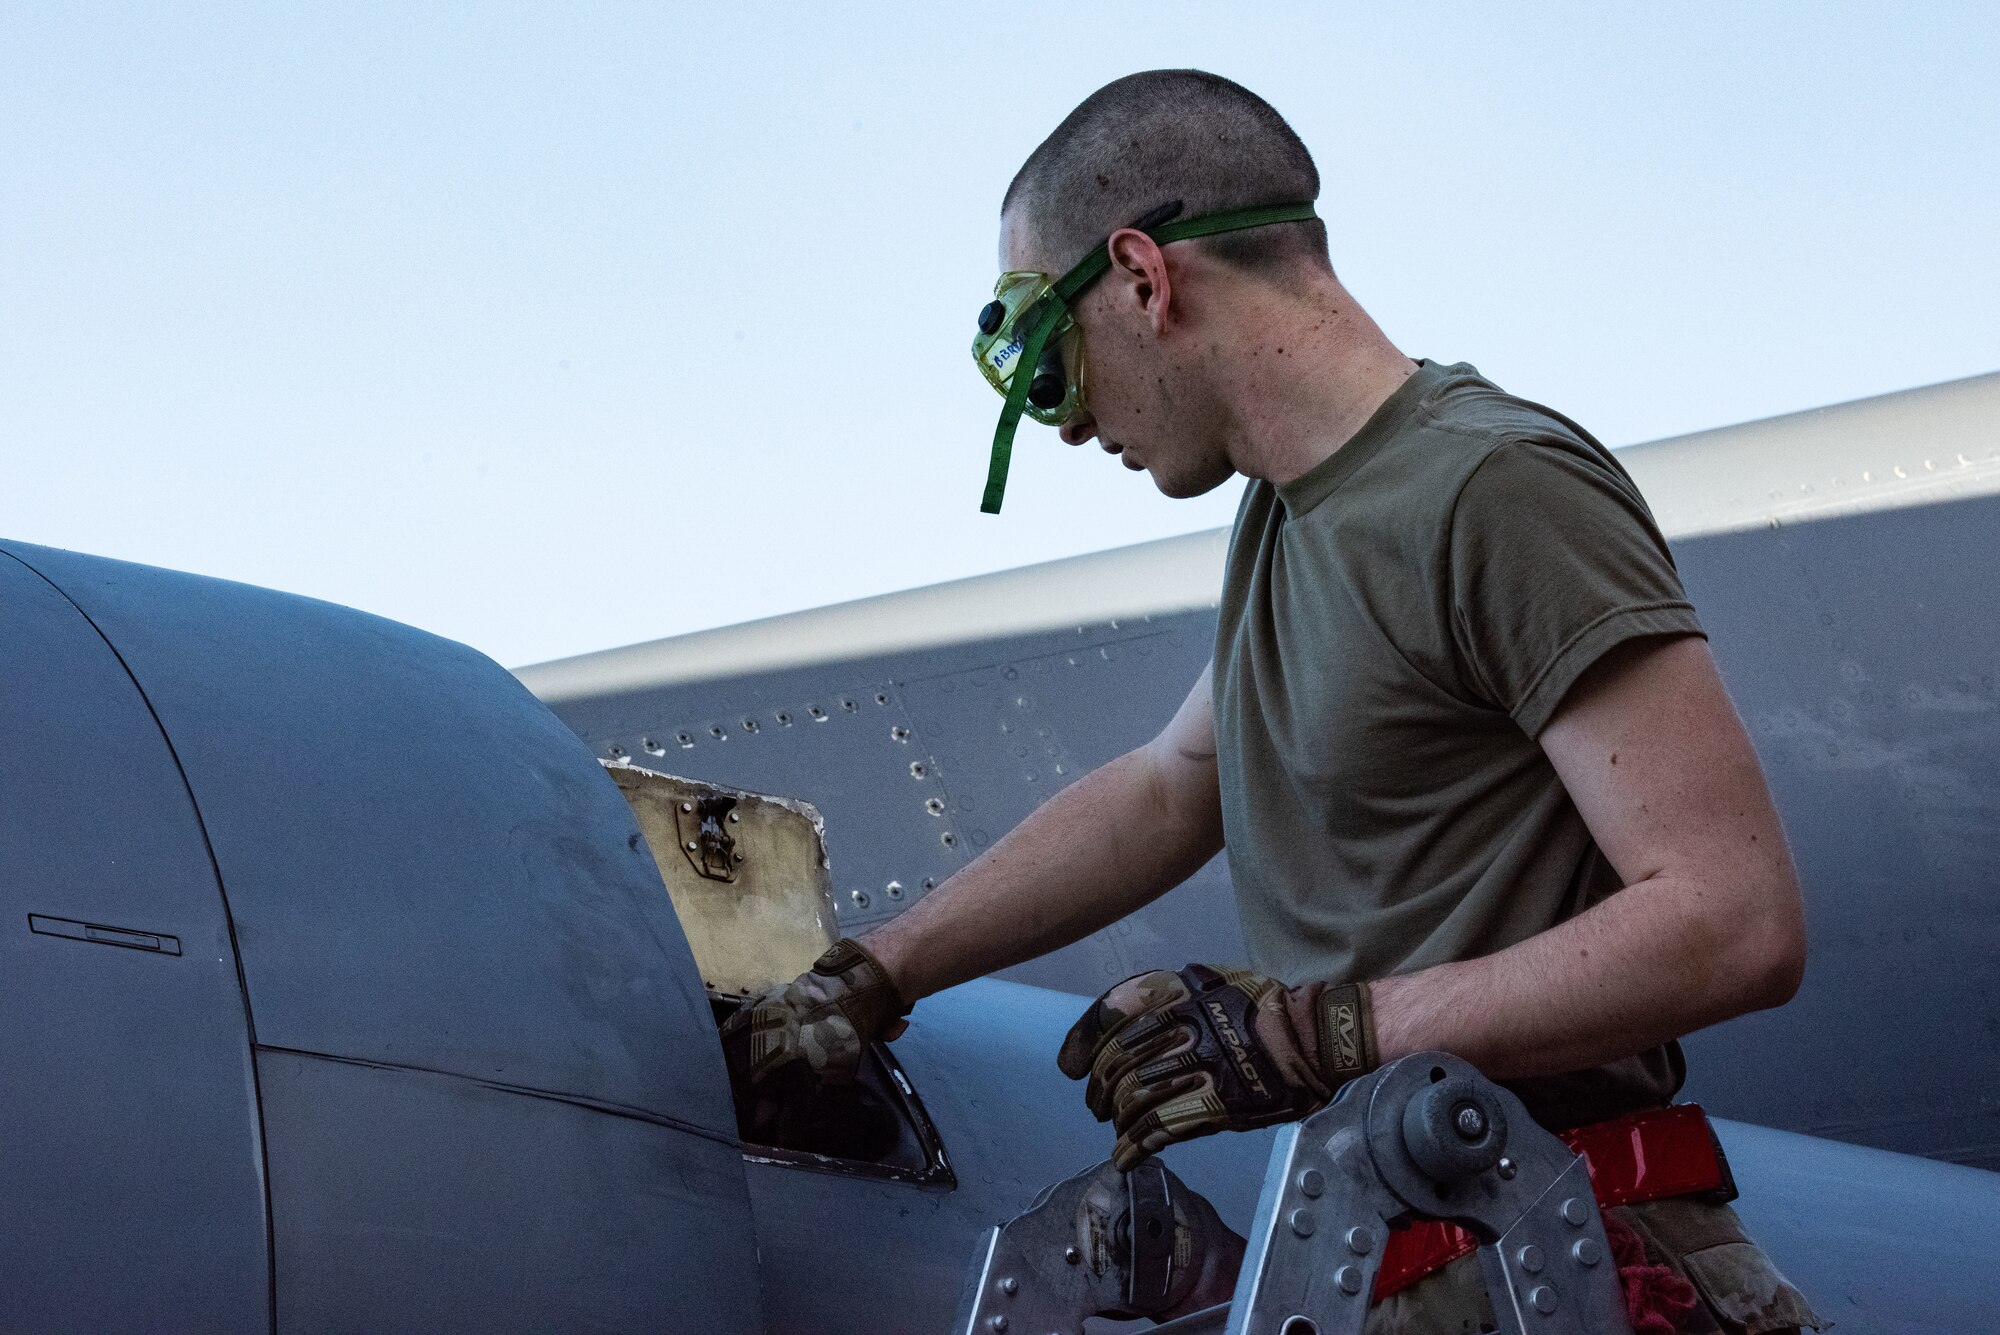 Airman 1st Class Camron Young, 2nd Aircraft Maintenance Squadron crew chief, conducts post-flight maintenance on a B-52 Stratofortress in support of a Bomber Task Force mission at Andersen Air Force Base, Guam, Feb. 9th, 2022. BTF missions demonstrate lethality and interoperability in support of a free and open Indo-Pacific. (U.S. Air Force photo by Senior Airman Jonathan E. Ramos)